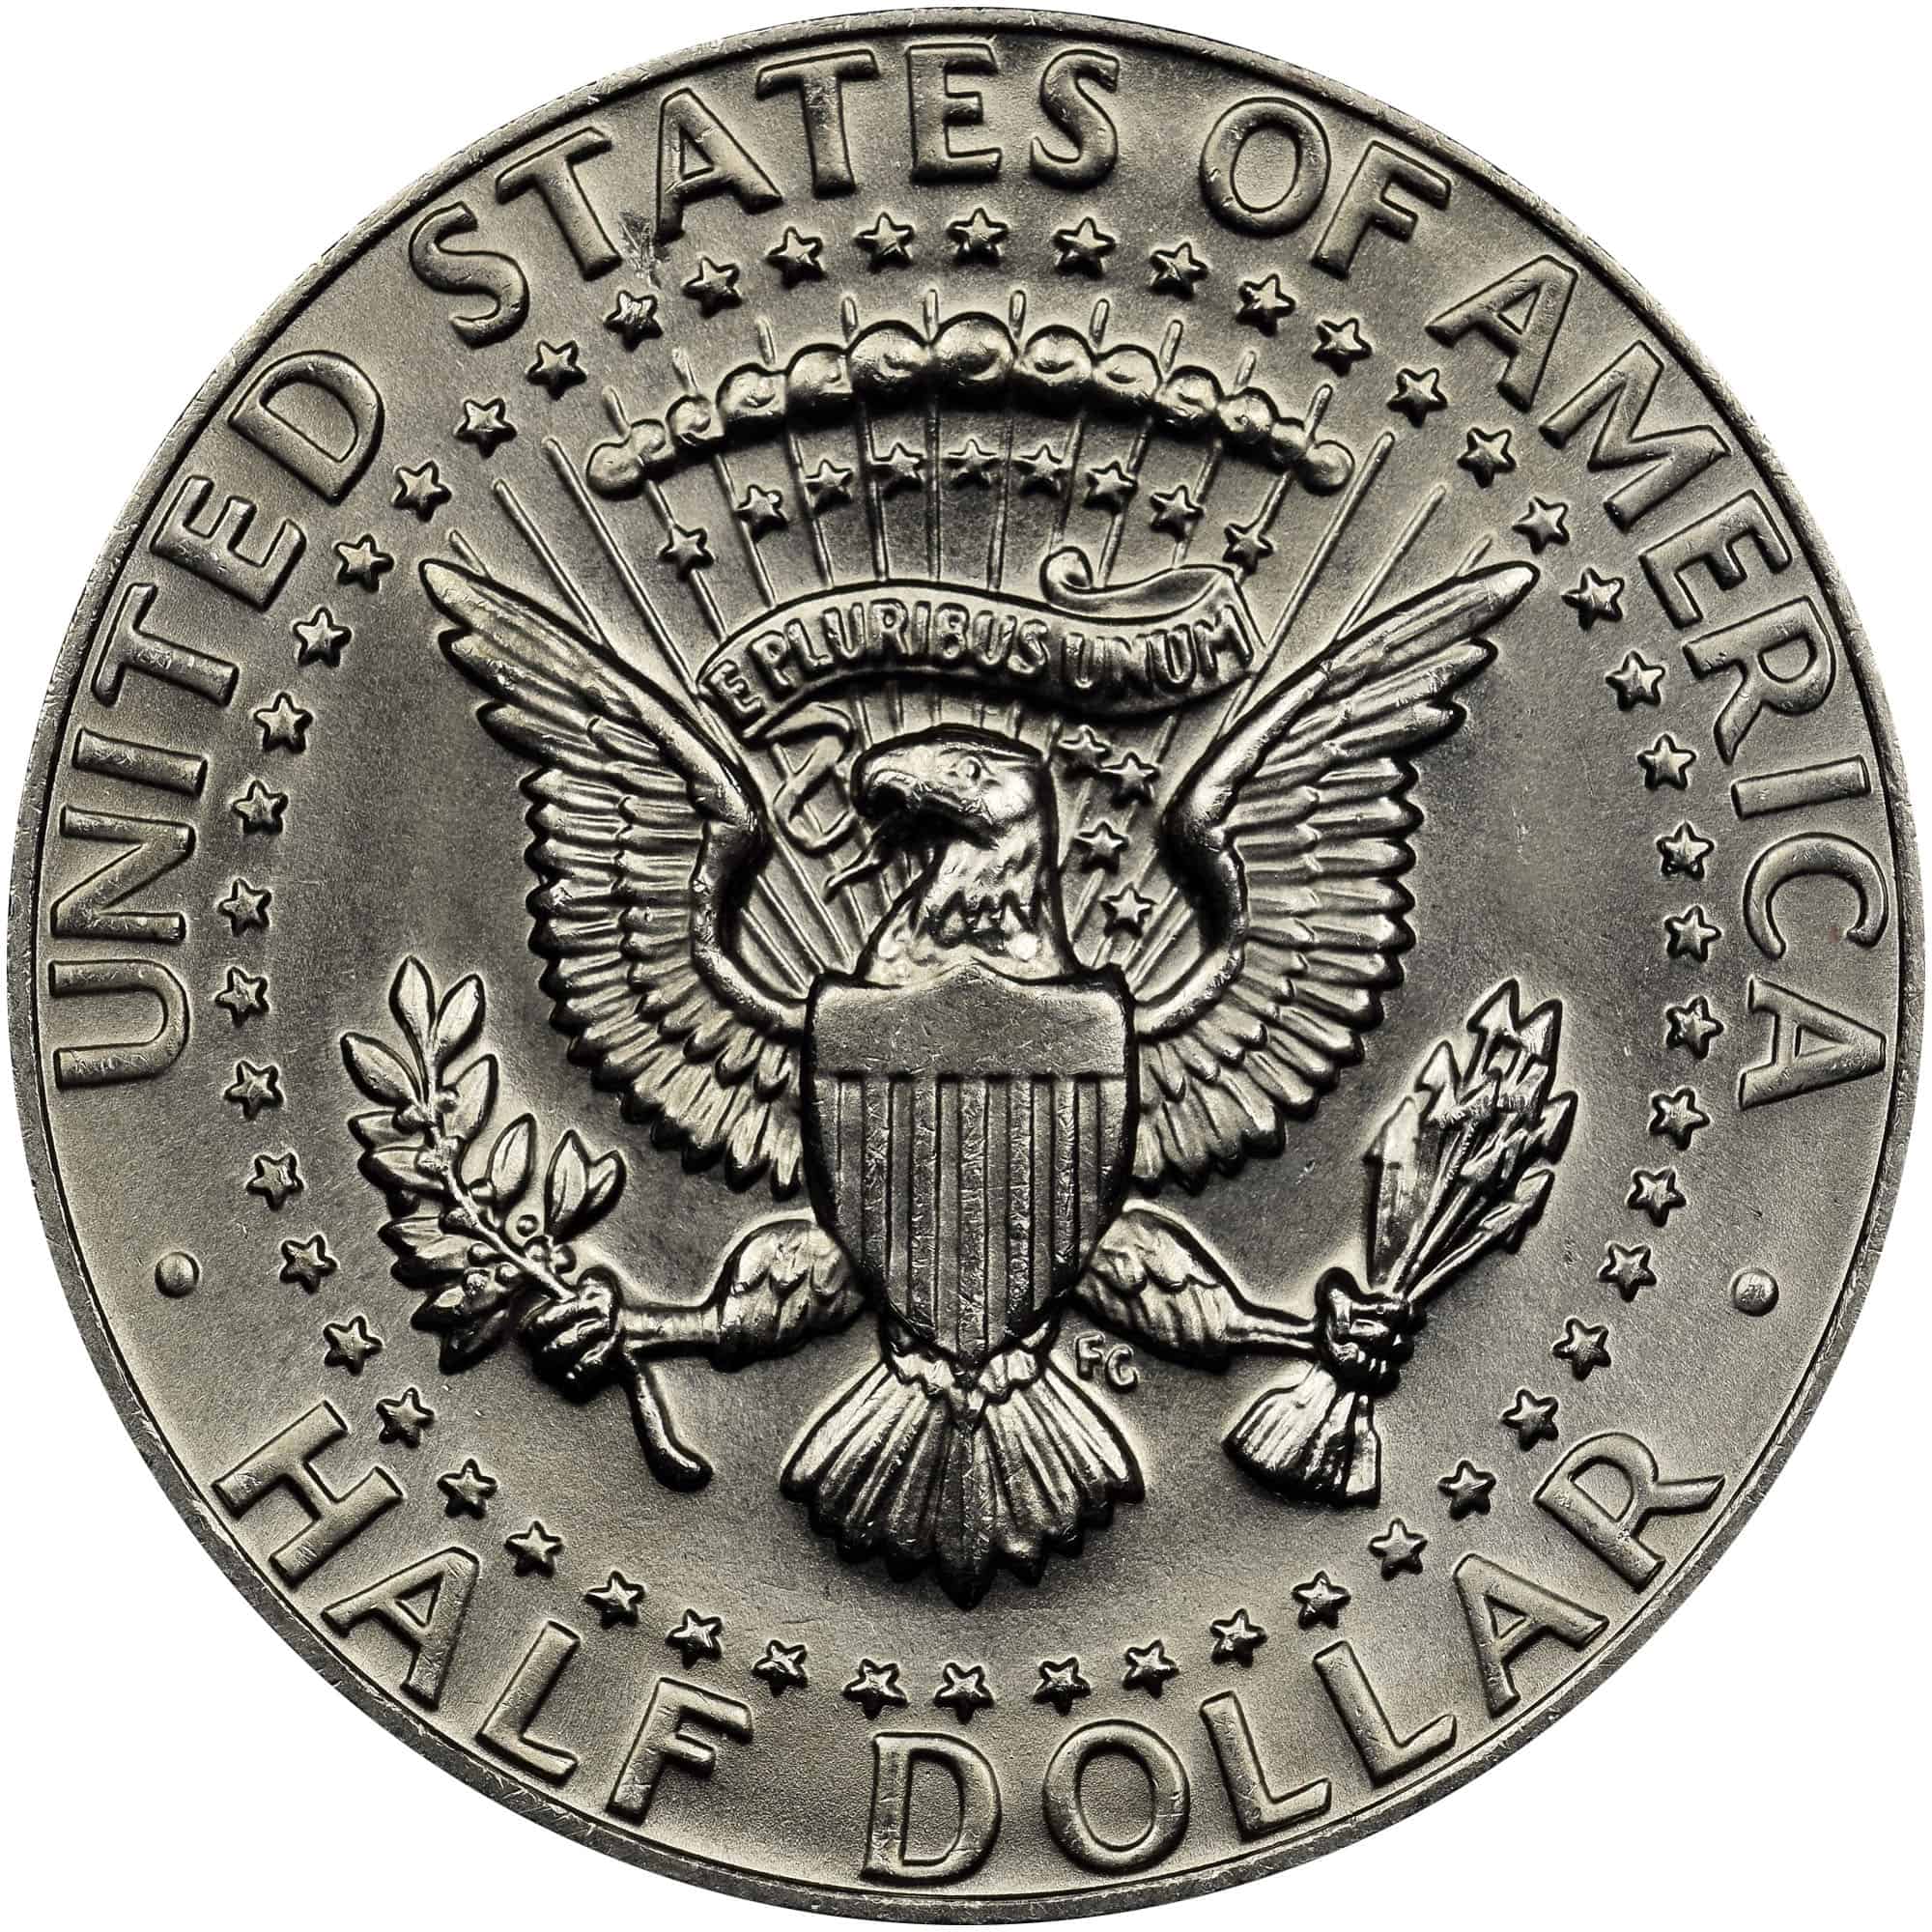 The reverse of the 1986 Kennedy half-dollar